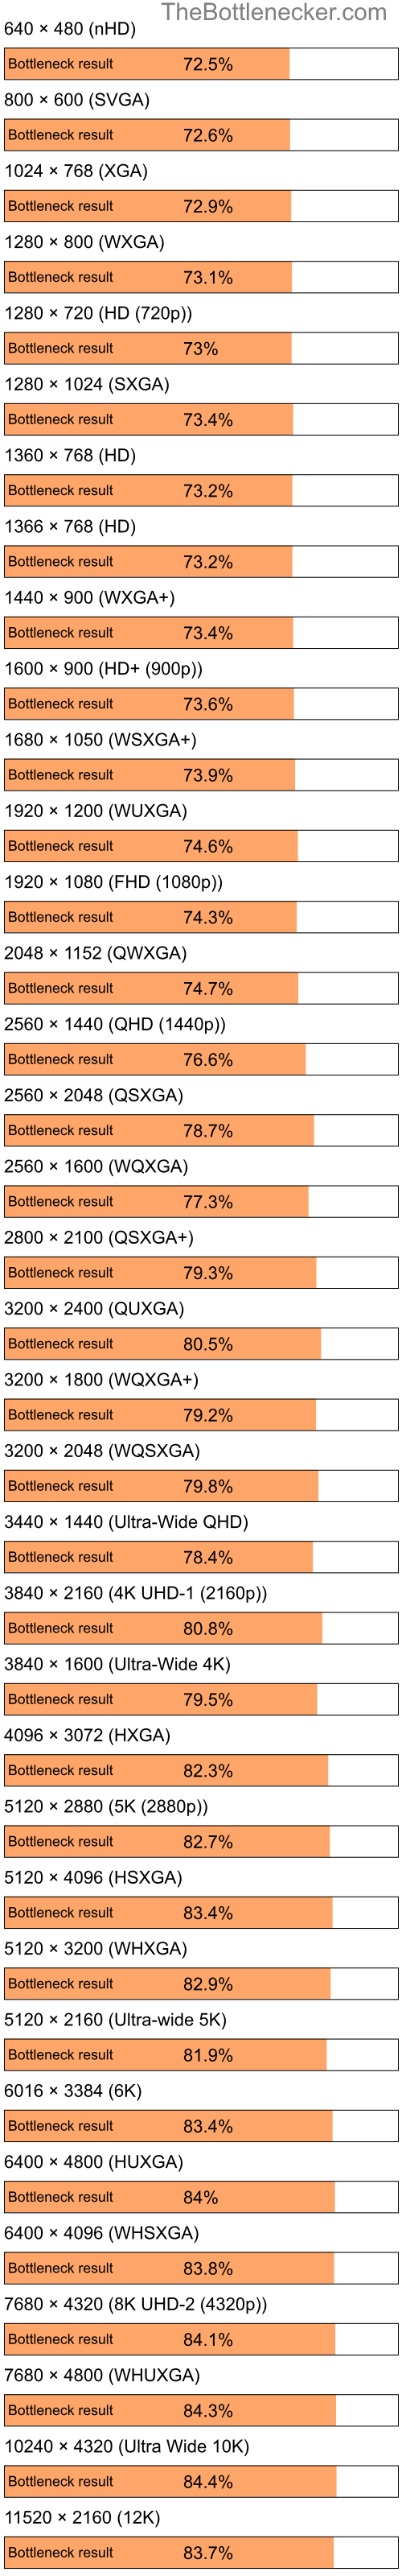 Bottleneck results by resolution for Intel Celeron and NVIDIA GeForce 7300 LE in Graphic Card Intense Tasks